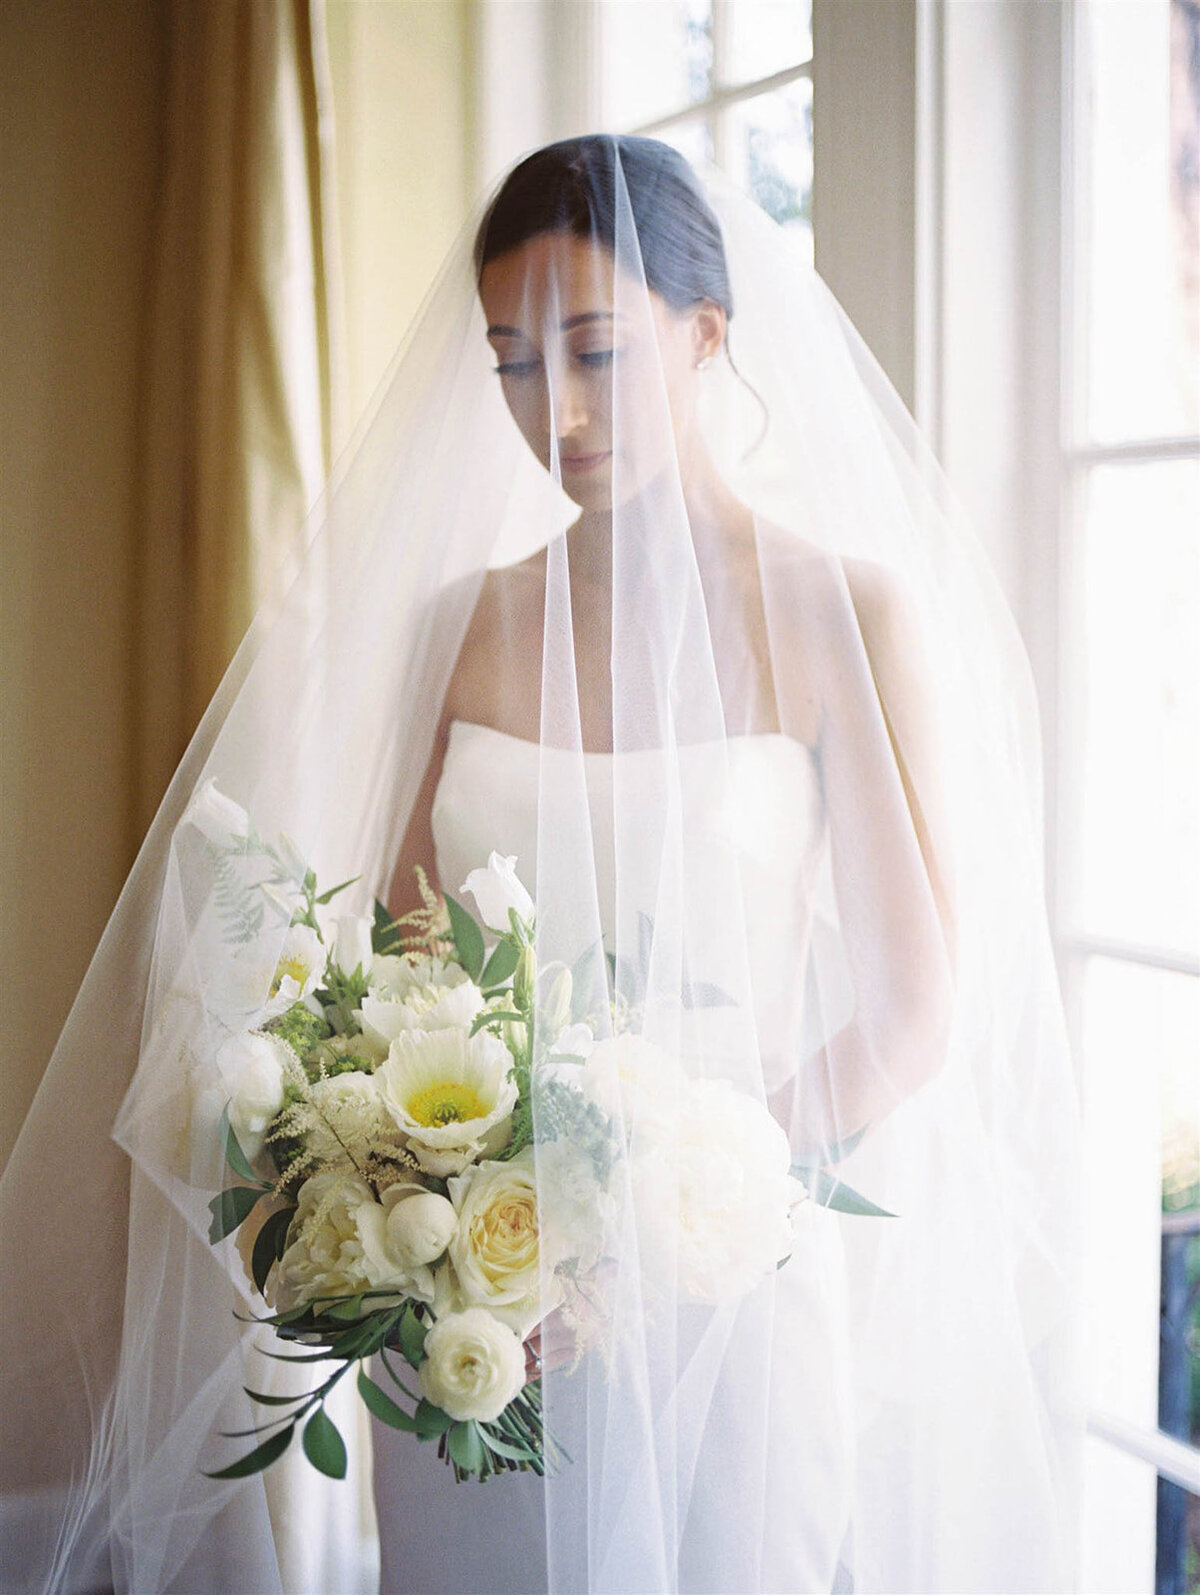 A classic photo of a bride holding and observing her bouquet